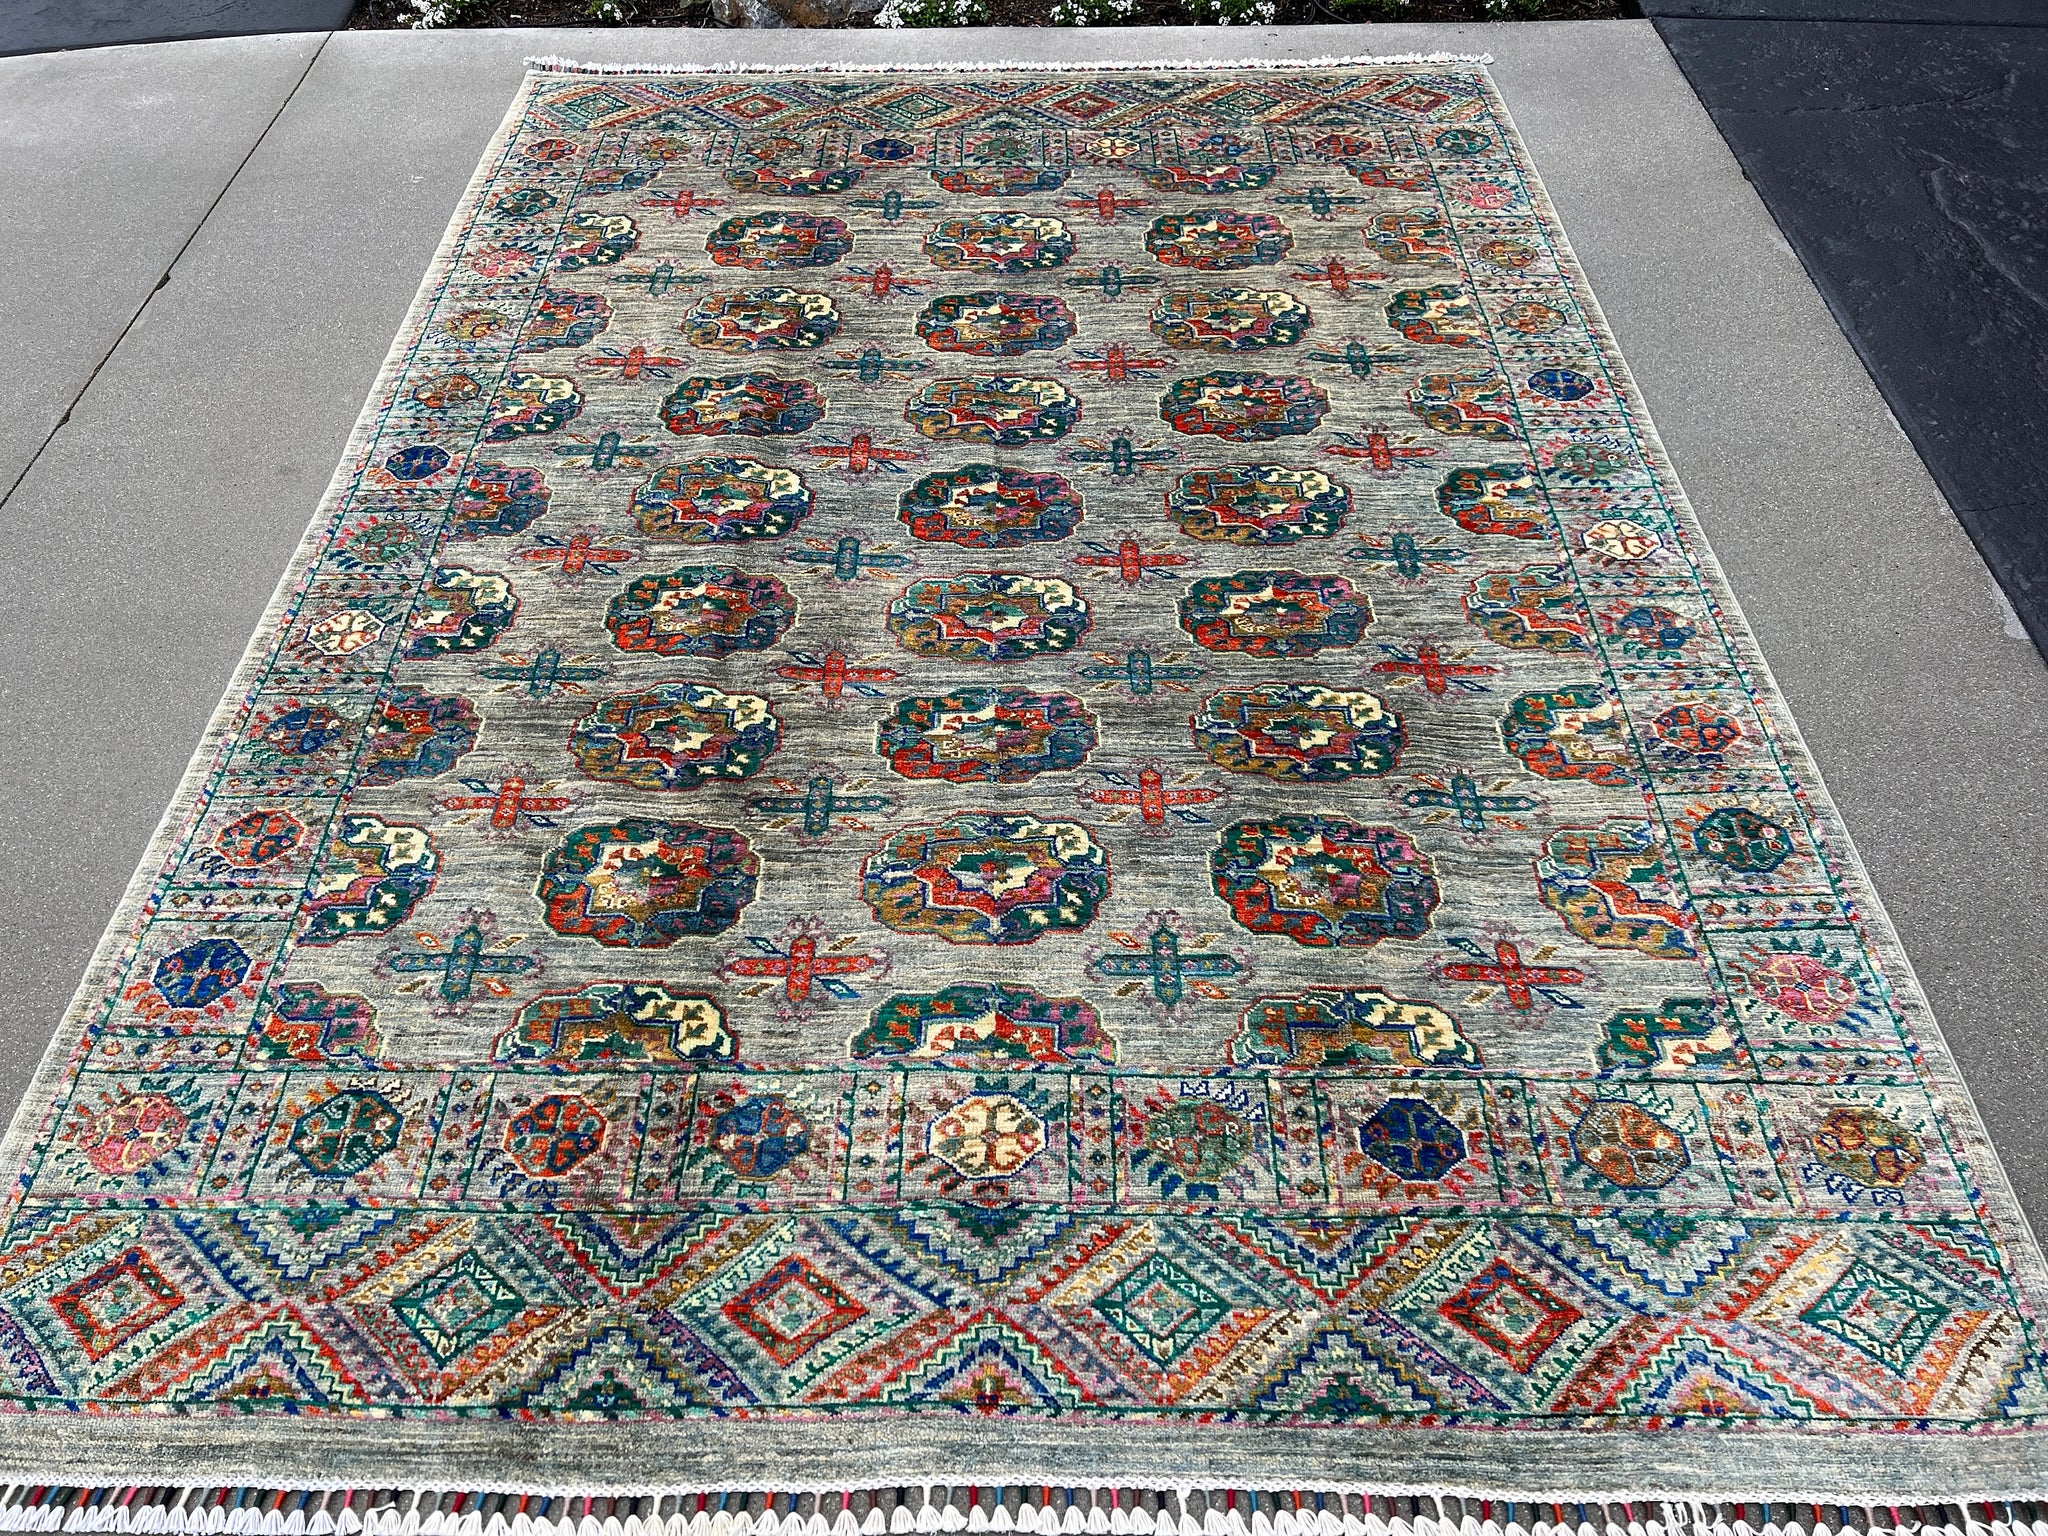 6x8 (180x245) Fair Trade Handmade Afghan Rug | Grey Gray Blue Pink Ivory Orange Teal Yellow Cream Beige Pine Green | Hand Knotted Persian